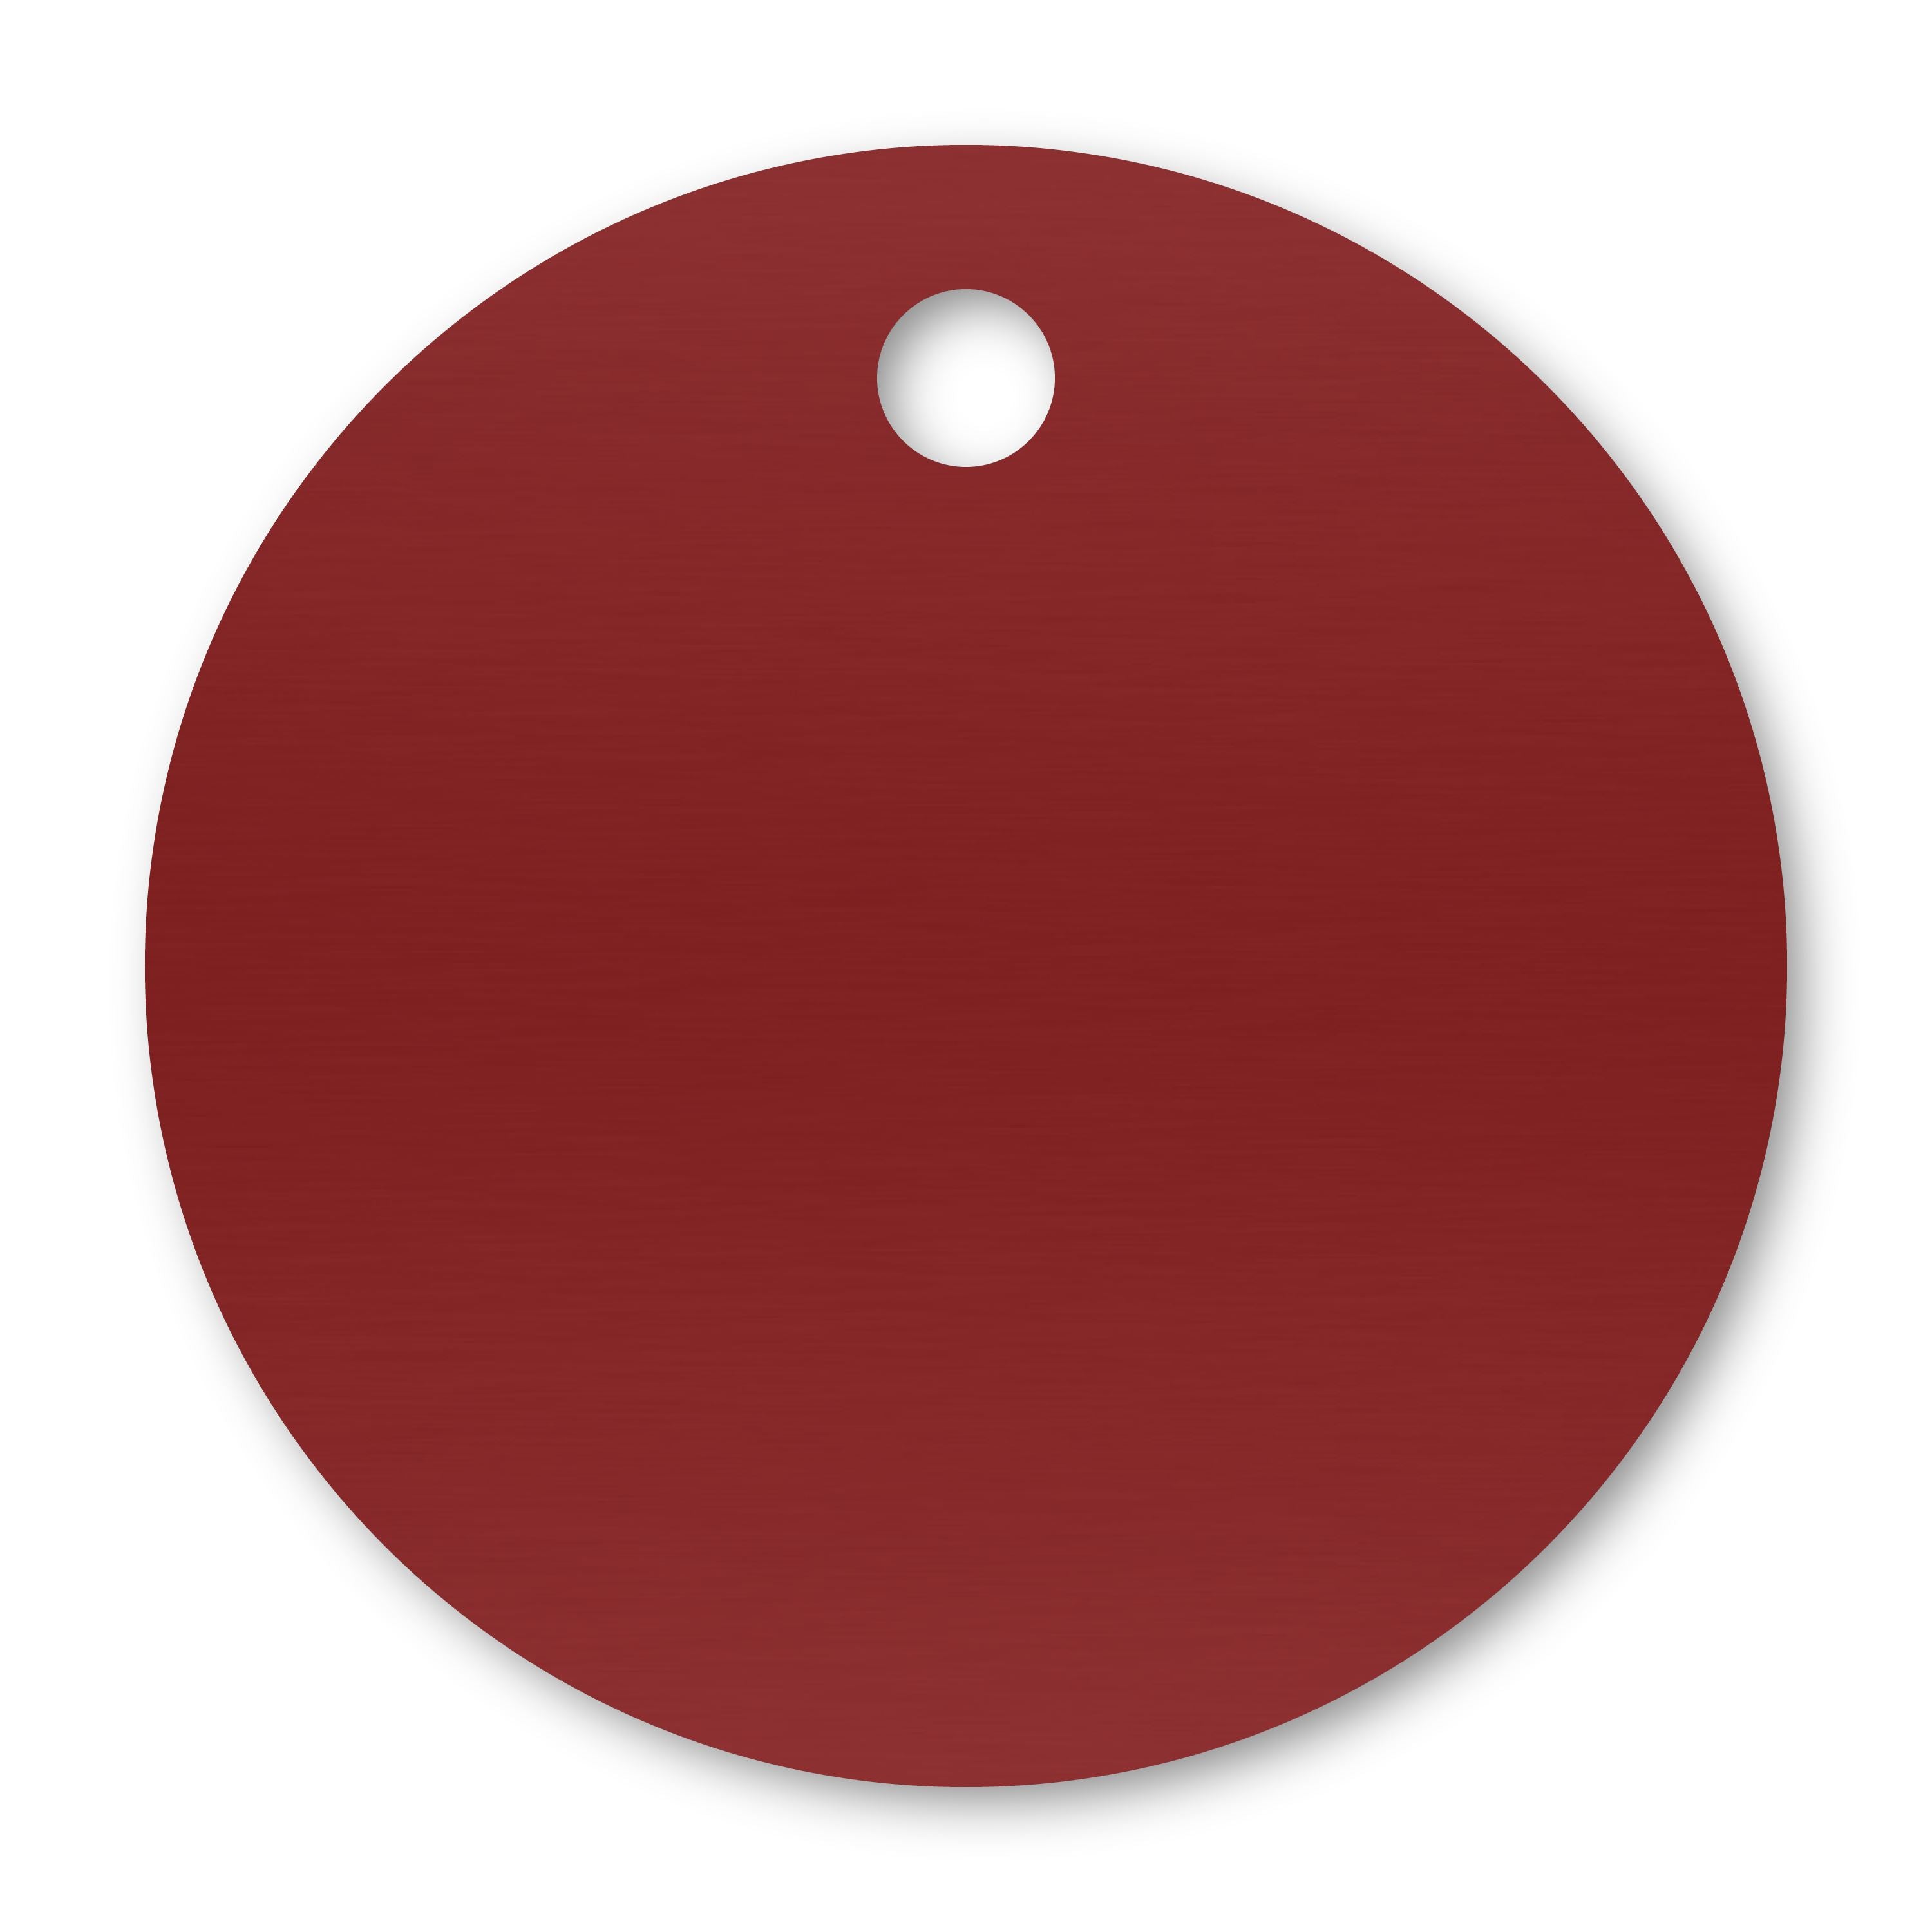 Anodized Aluminum Round Tags, 1-1/8" with 1/8" Hole, Laser Engraved Metal Tags Craftworks NW Red 